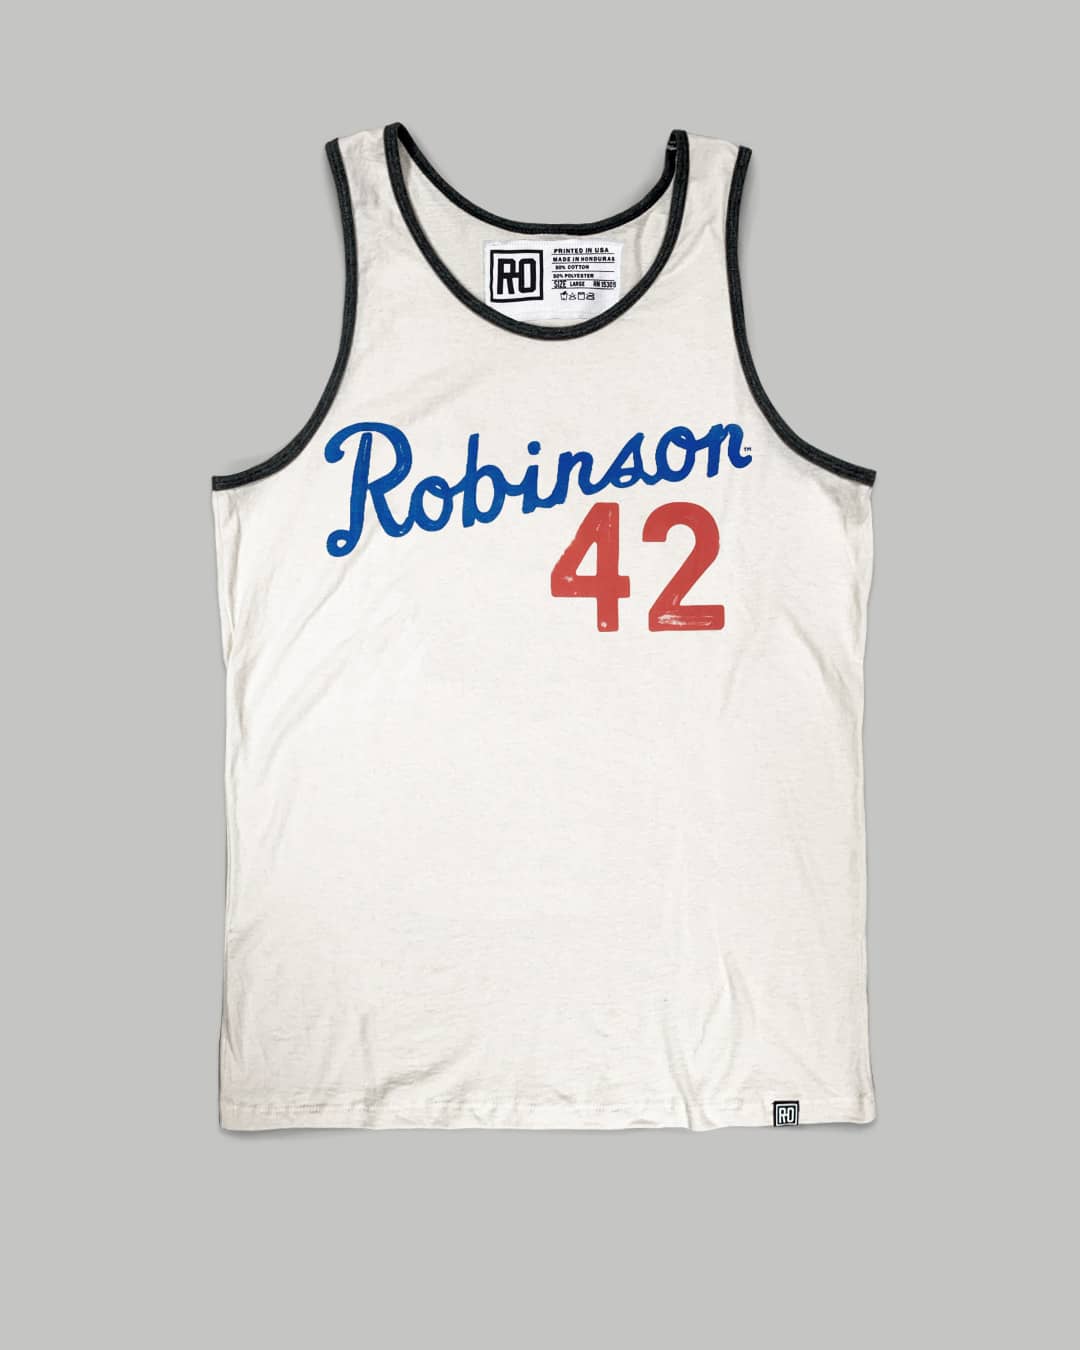 Jackie Robinson 42 Tribute Tank - Roots of Inc dba Roots of Fight